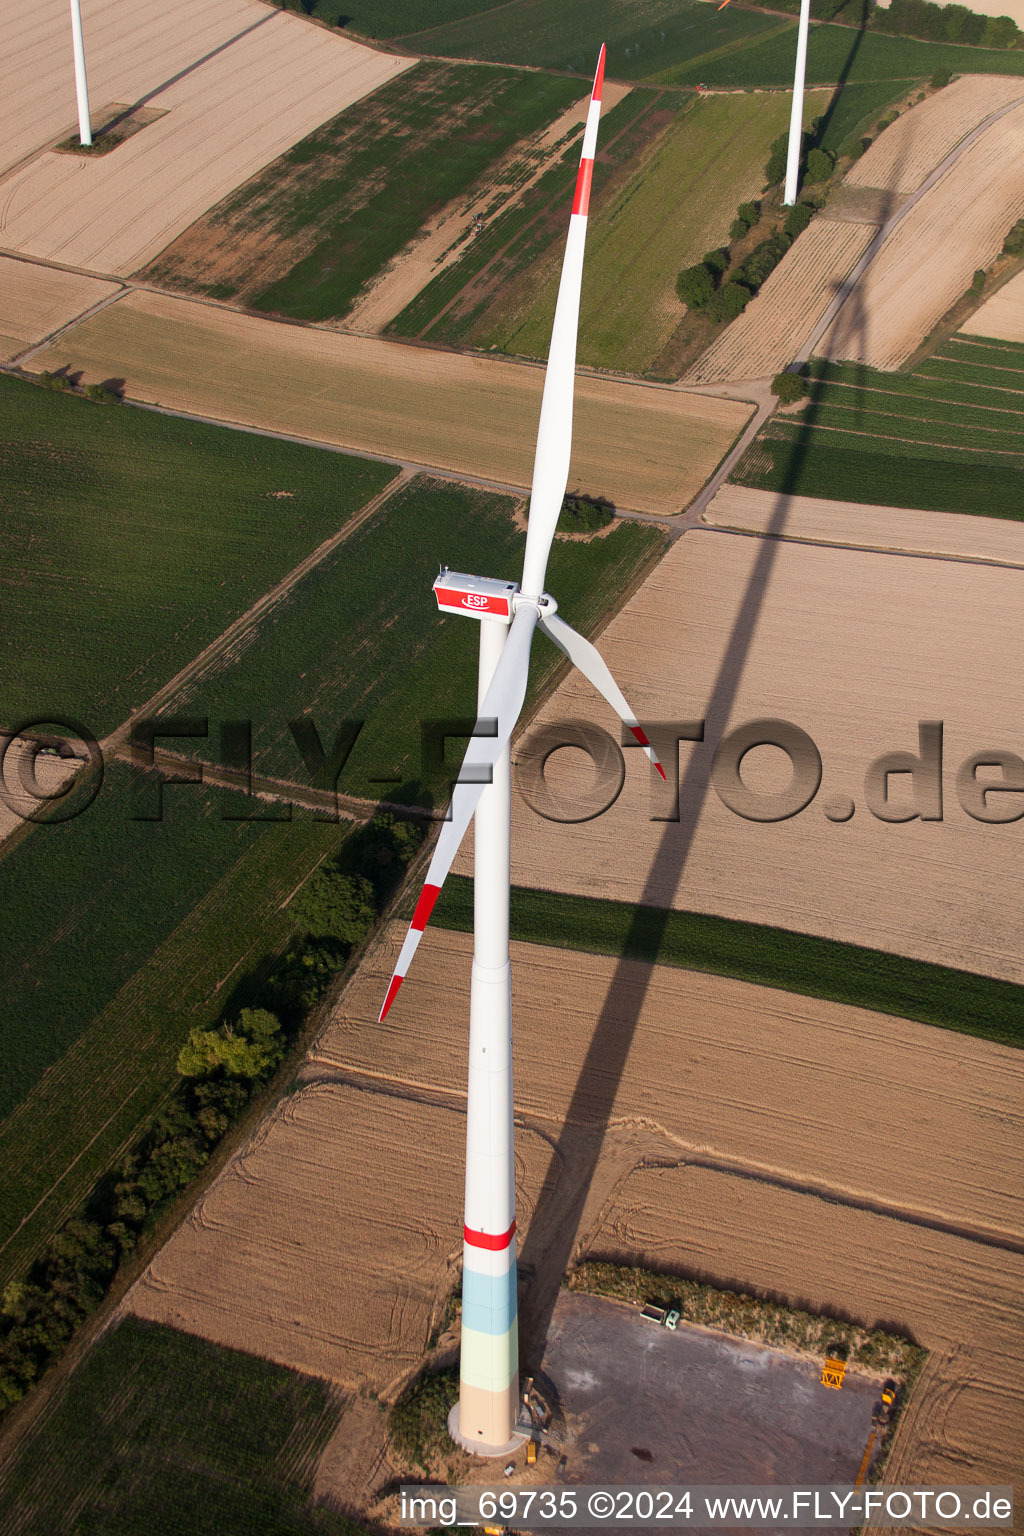 Wind farm construction in Offenbach an der Queich in the state Rhineland-Palatinate, Germany from a drone